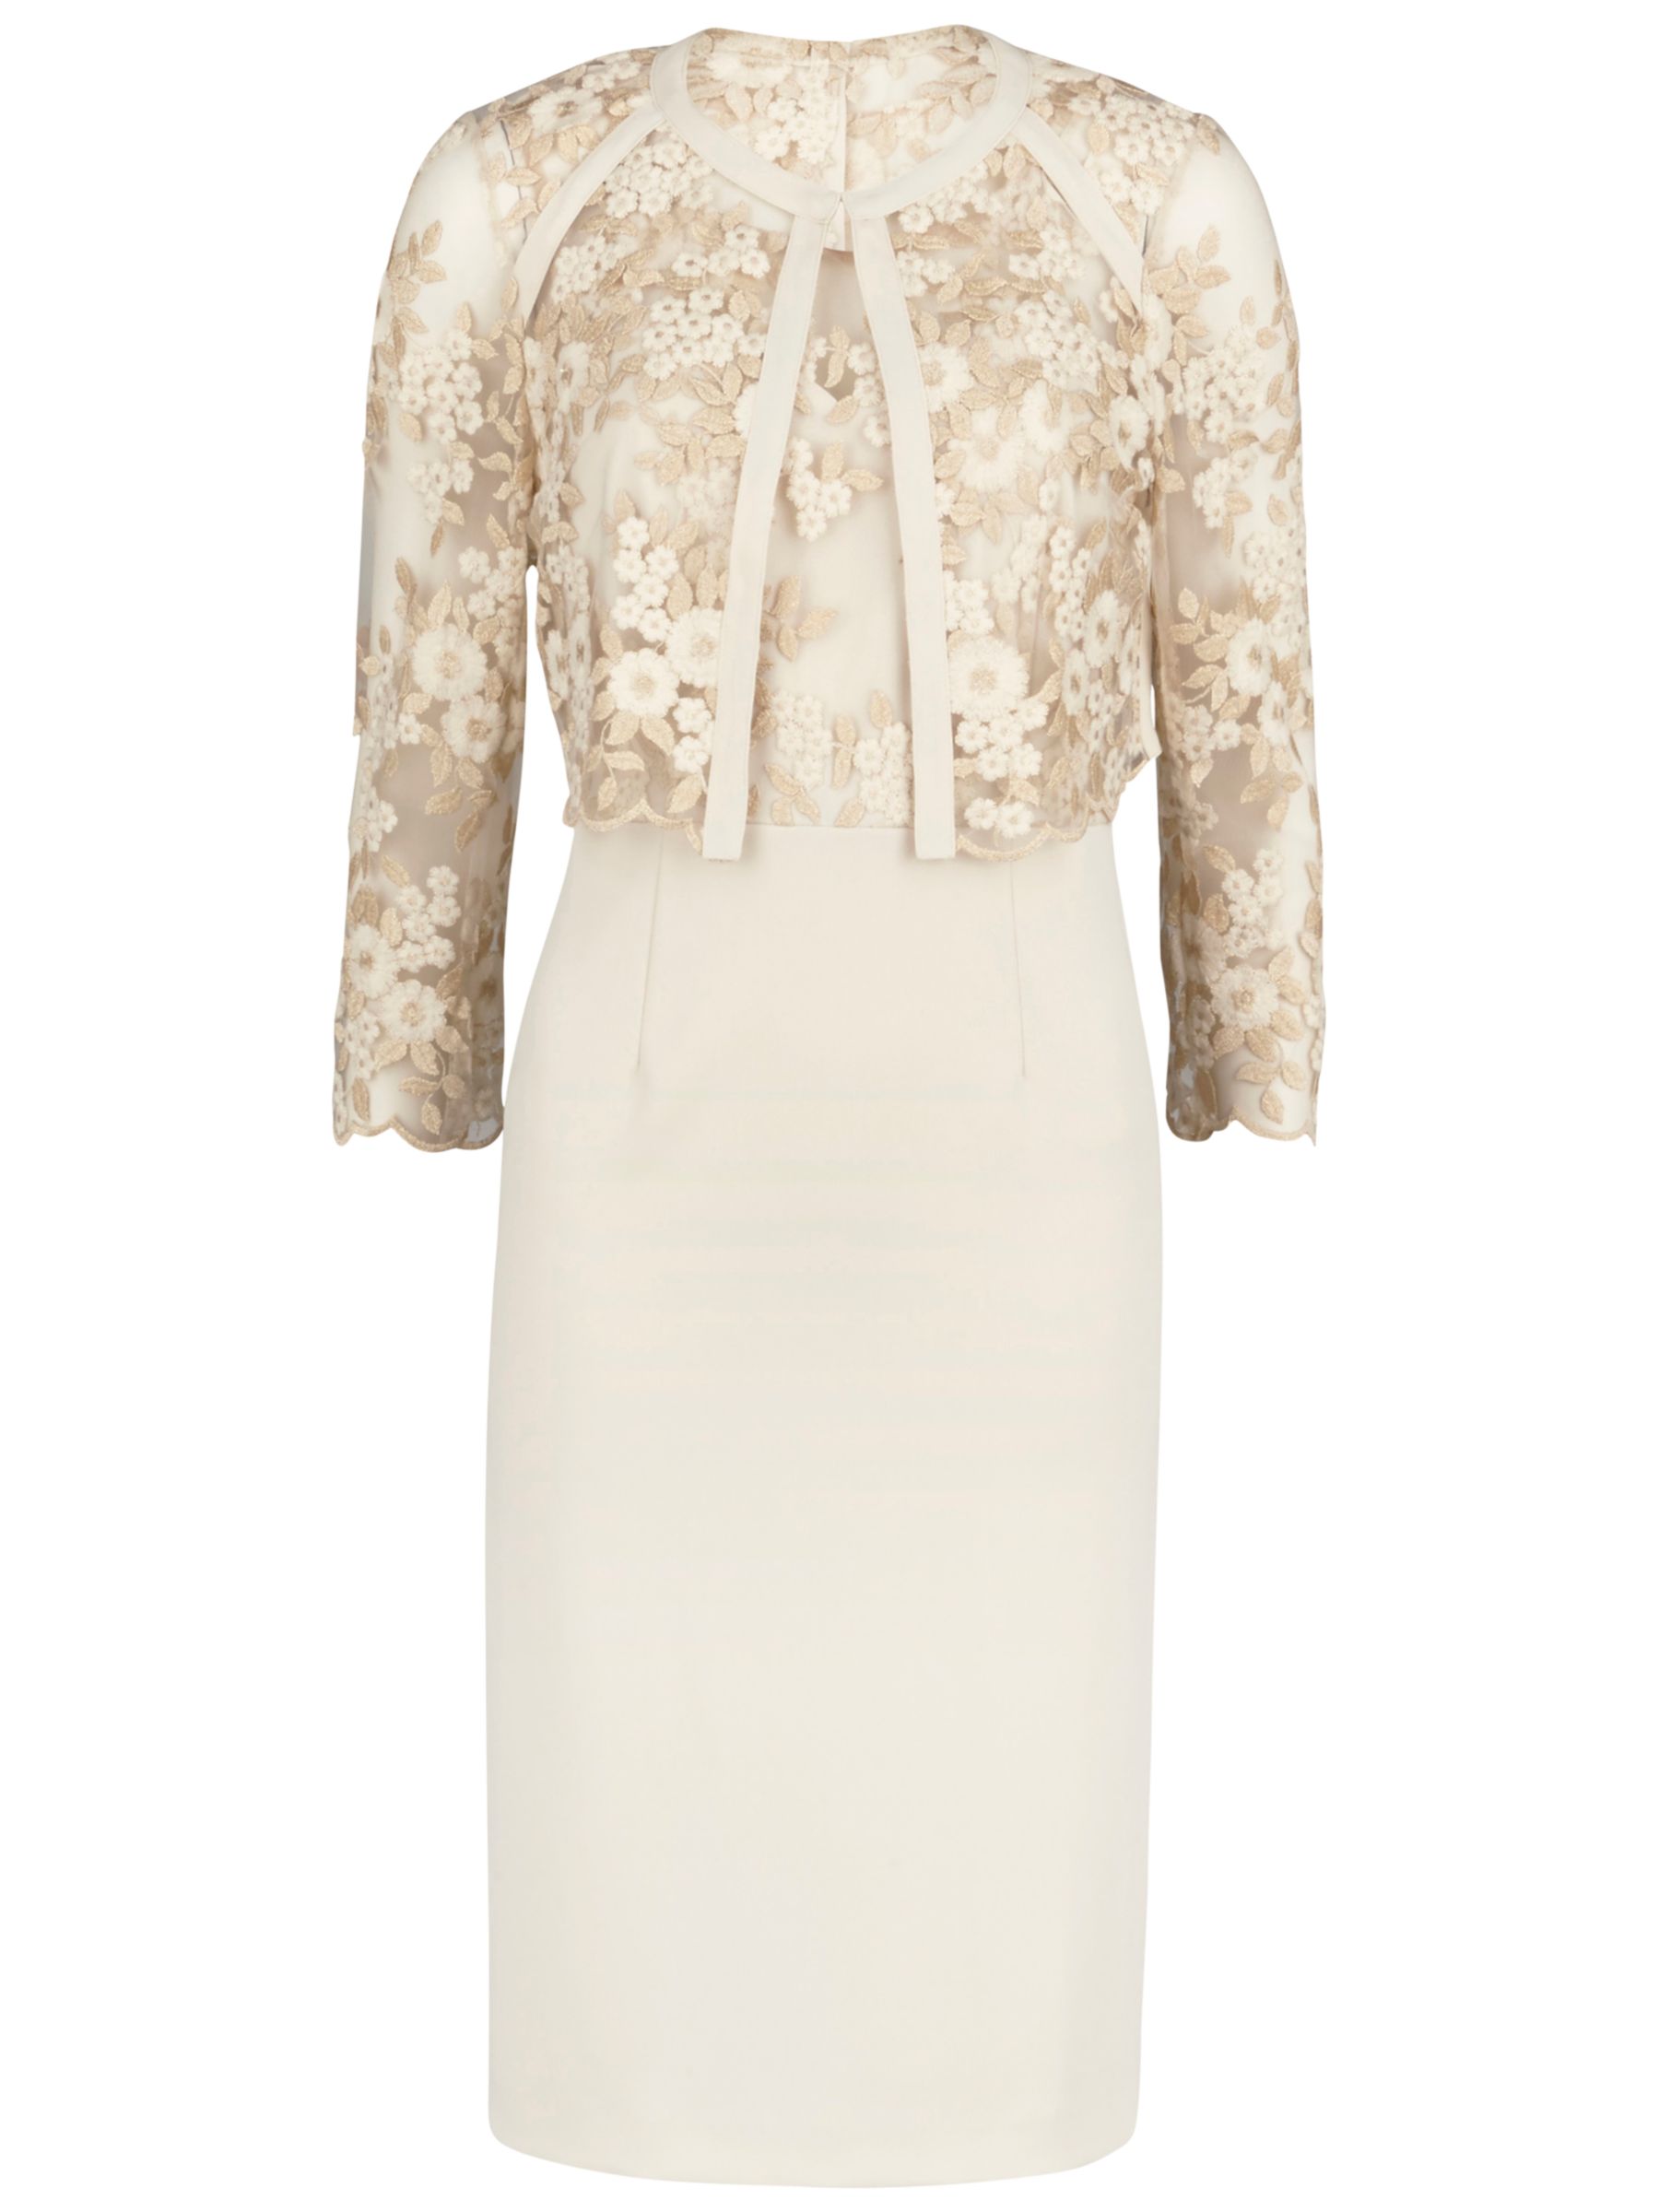 Gina Bacconi Embroidered Bodice Dress And Jacket, Gold